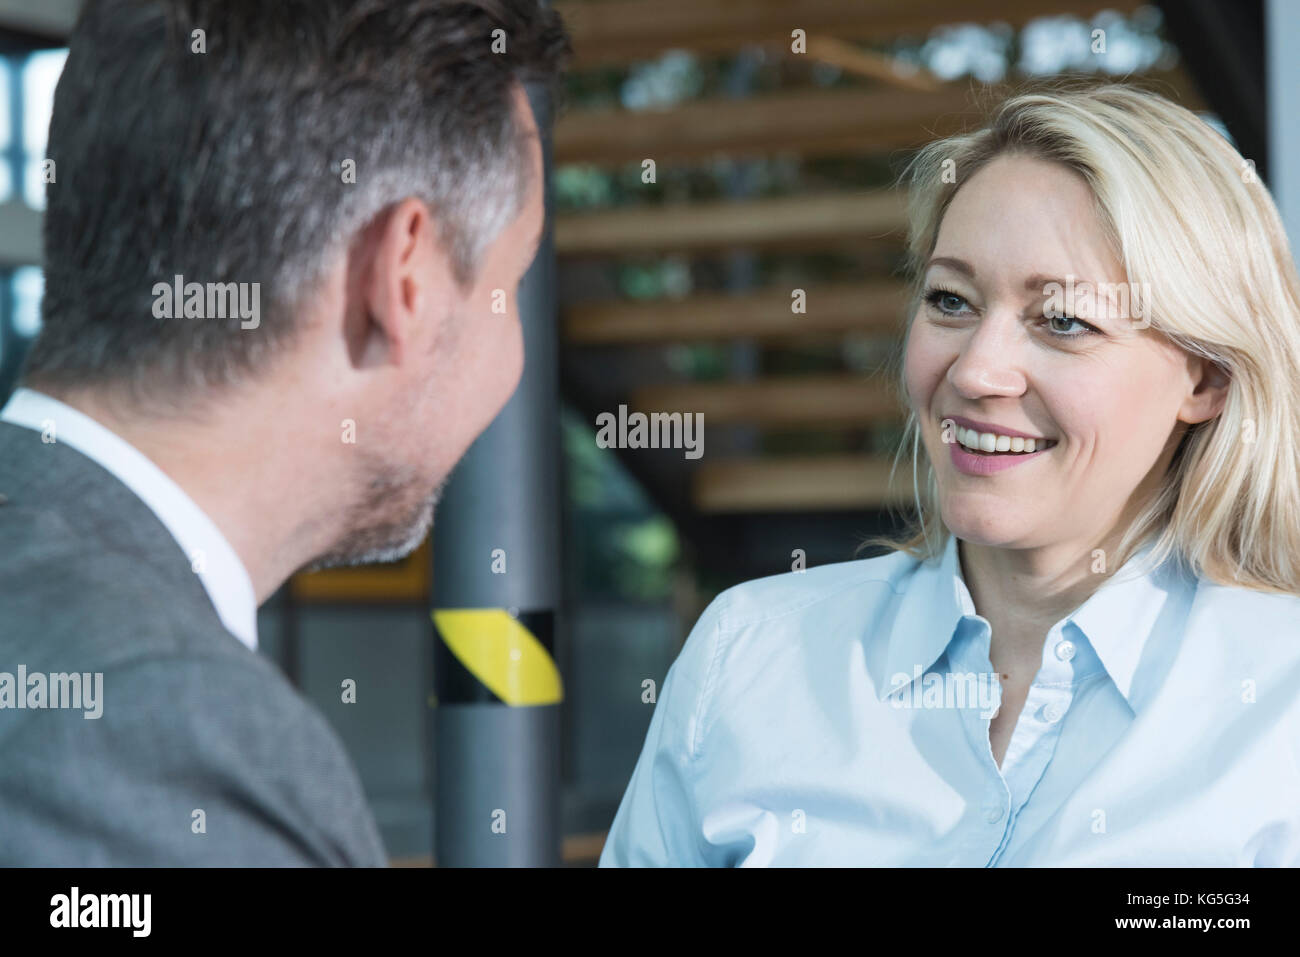 Businessman in the conversation with the businesswoman, shot over the shoulder of the man Stock Photo